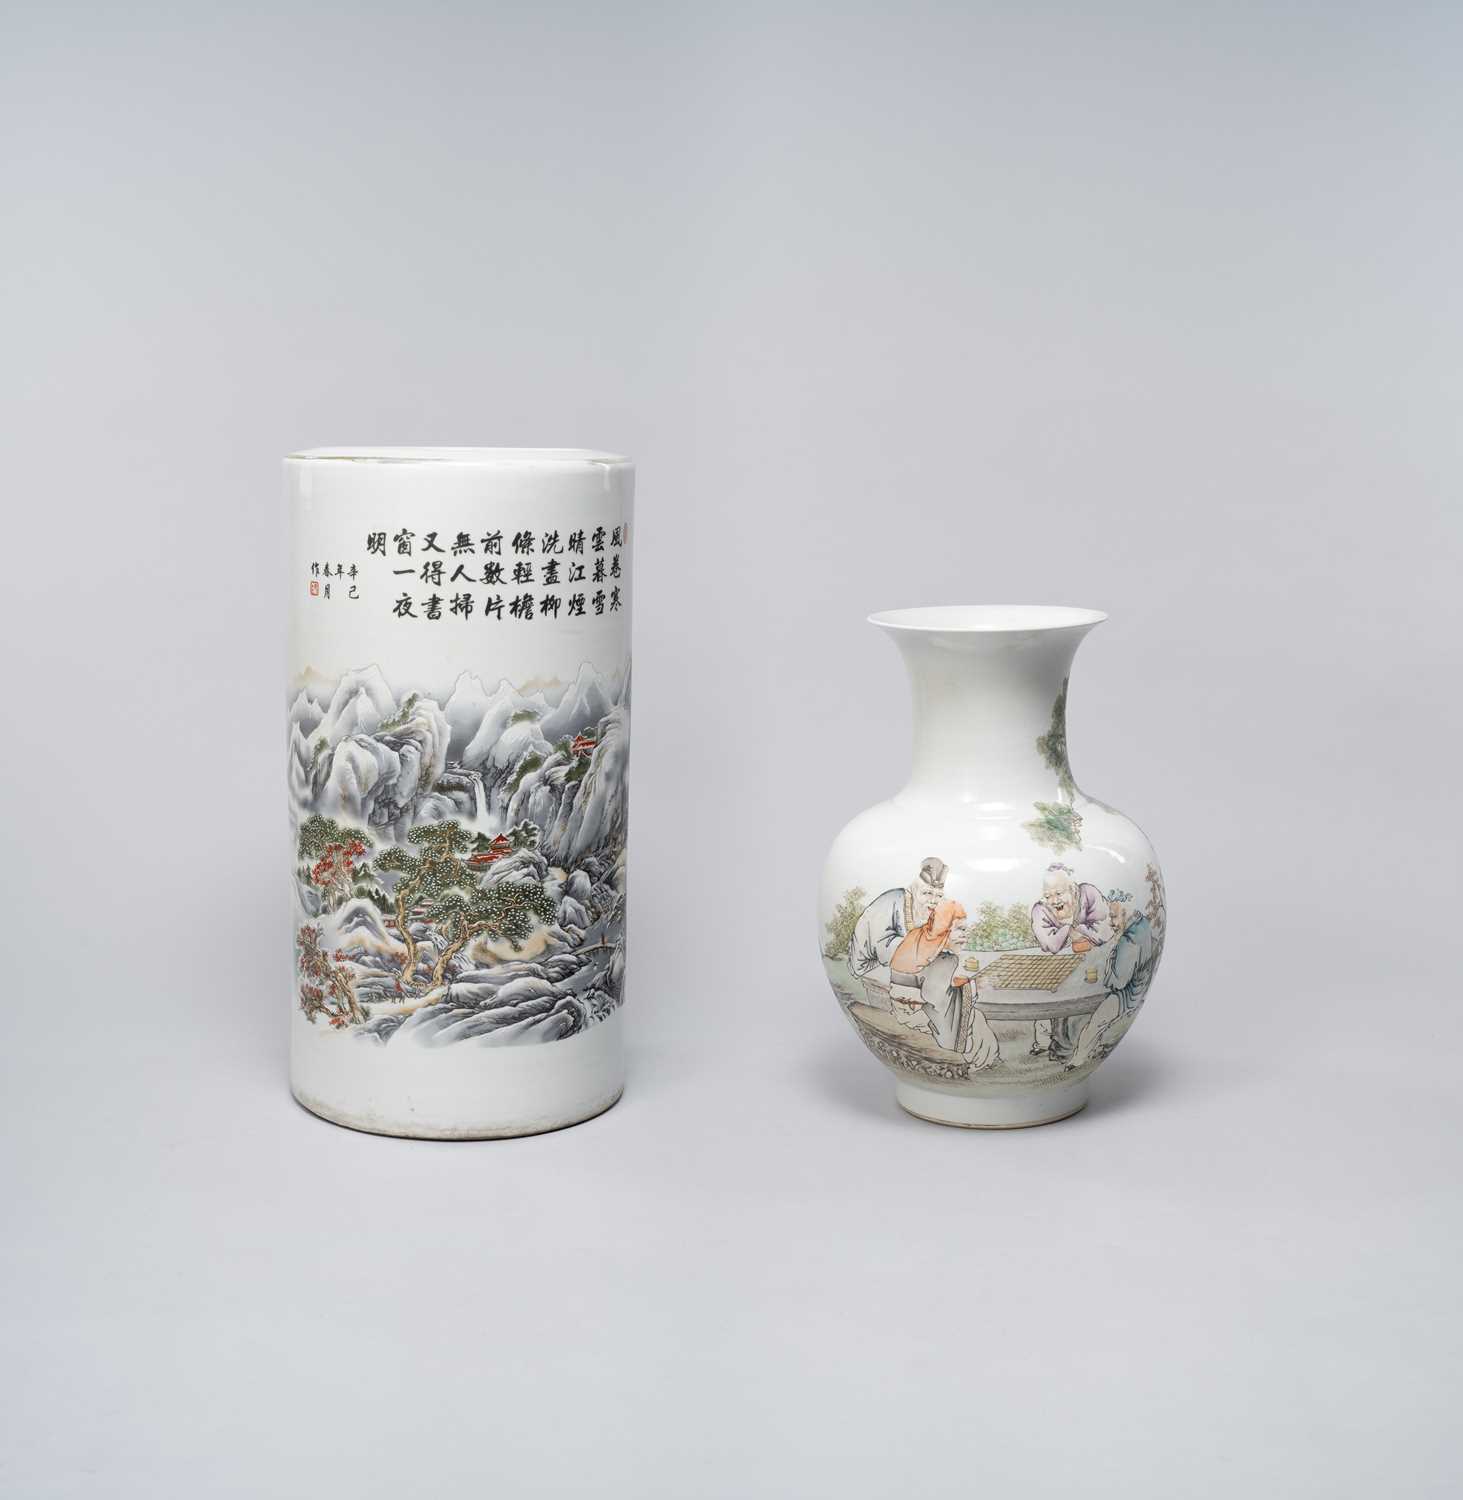 NO RESERVE A CHINESE FAMILLE ROSE 'SCHOLARS' VASE REPUBLIC PERIOD Painted with a group of scholars